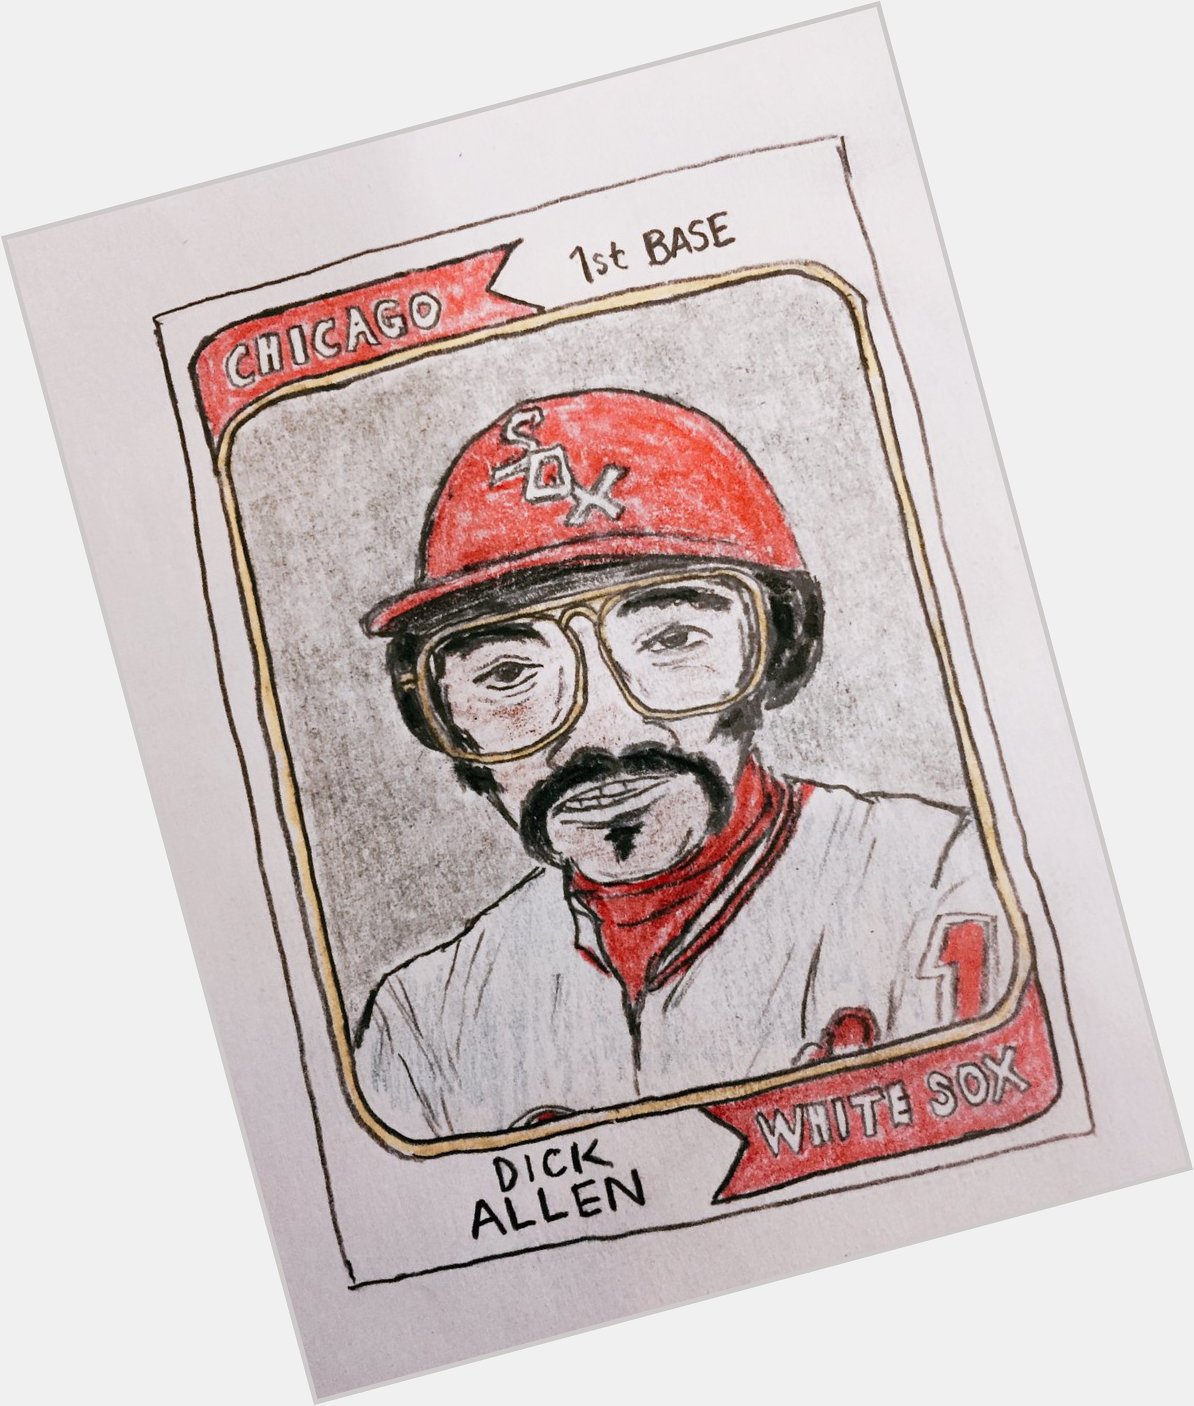 Wishing a very happy 75th birthday to Dick Allen!    